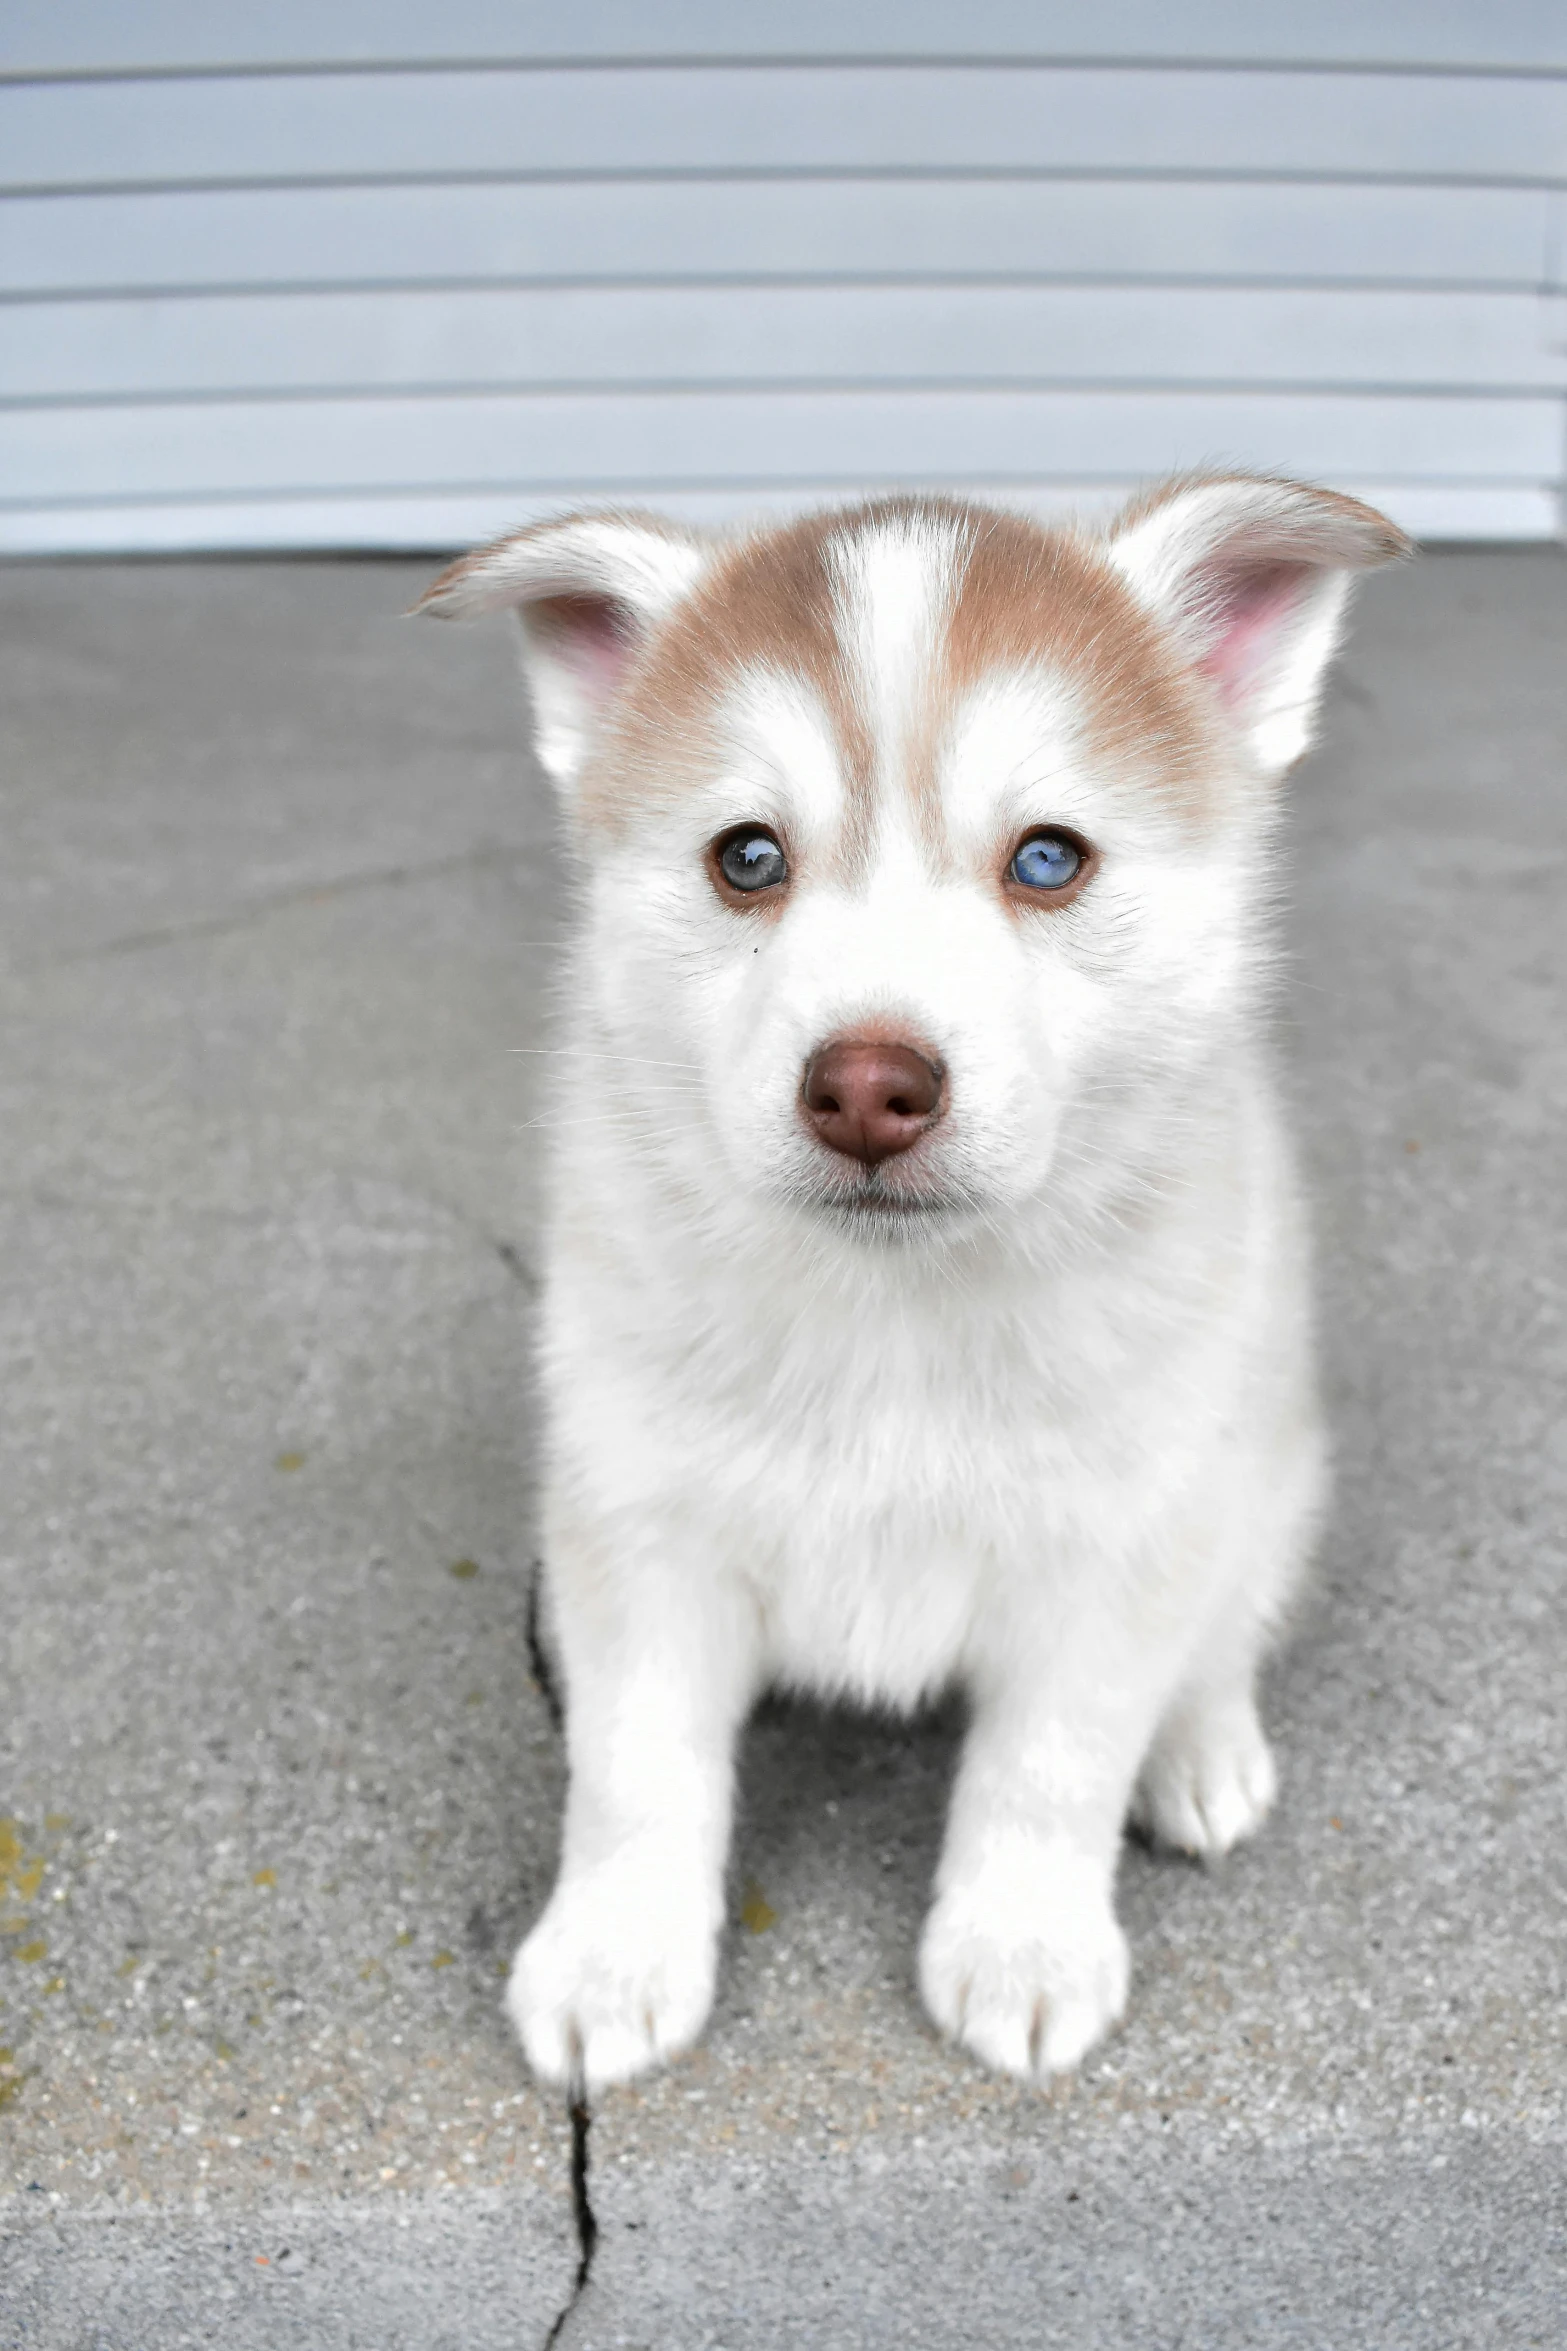 there is a white and brown dog with blue eyes